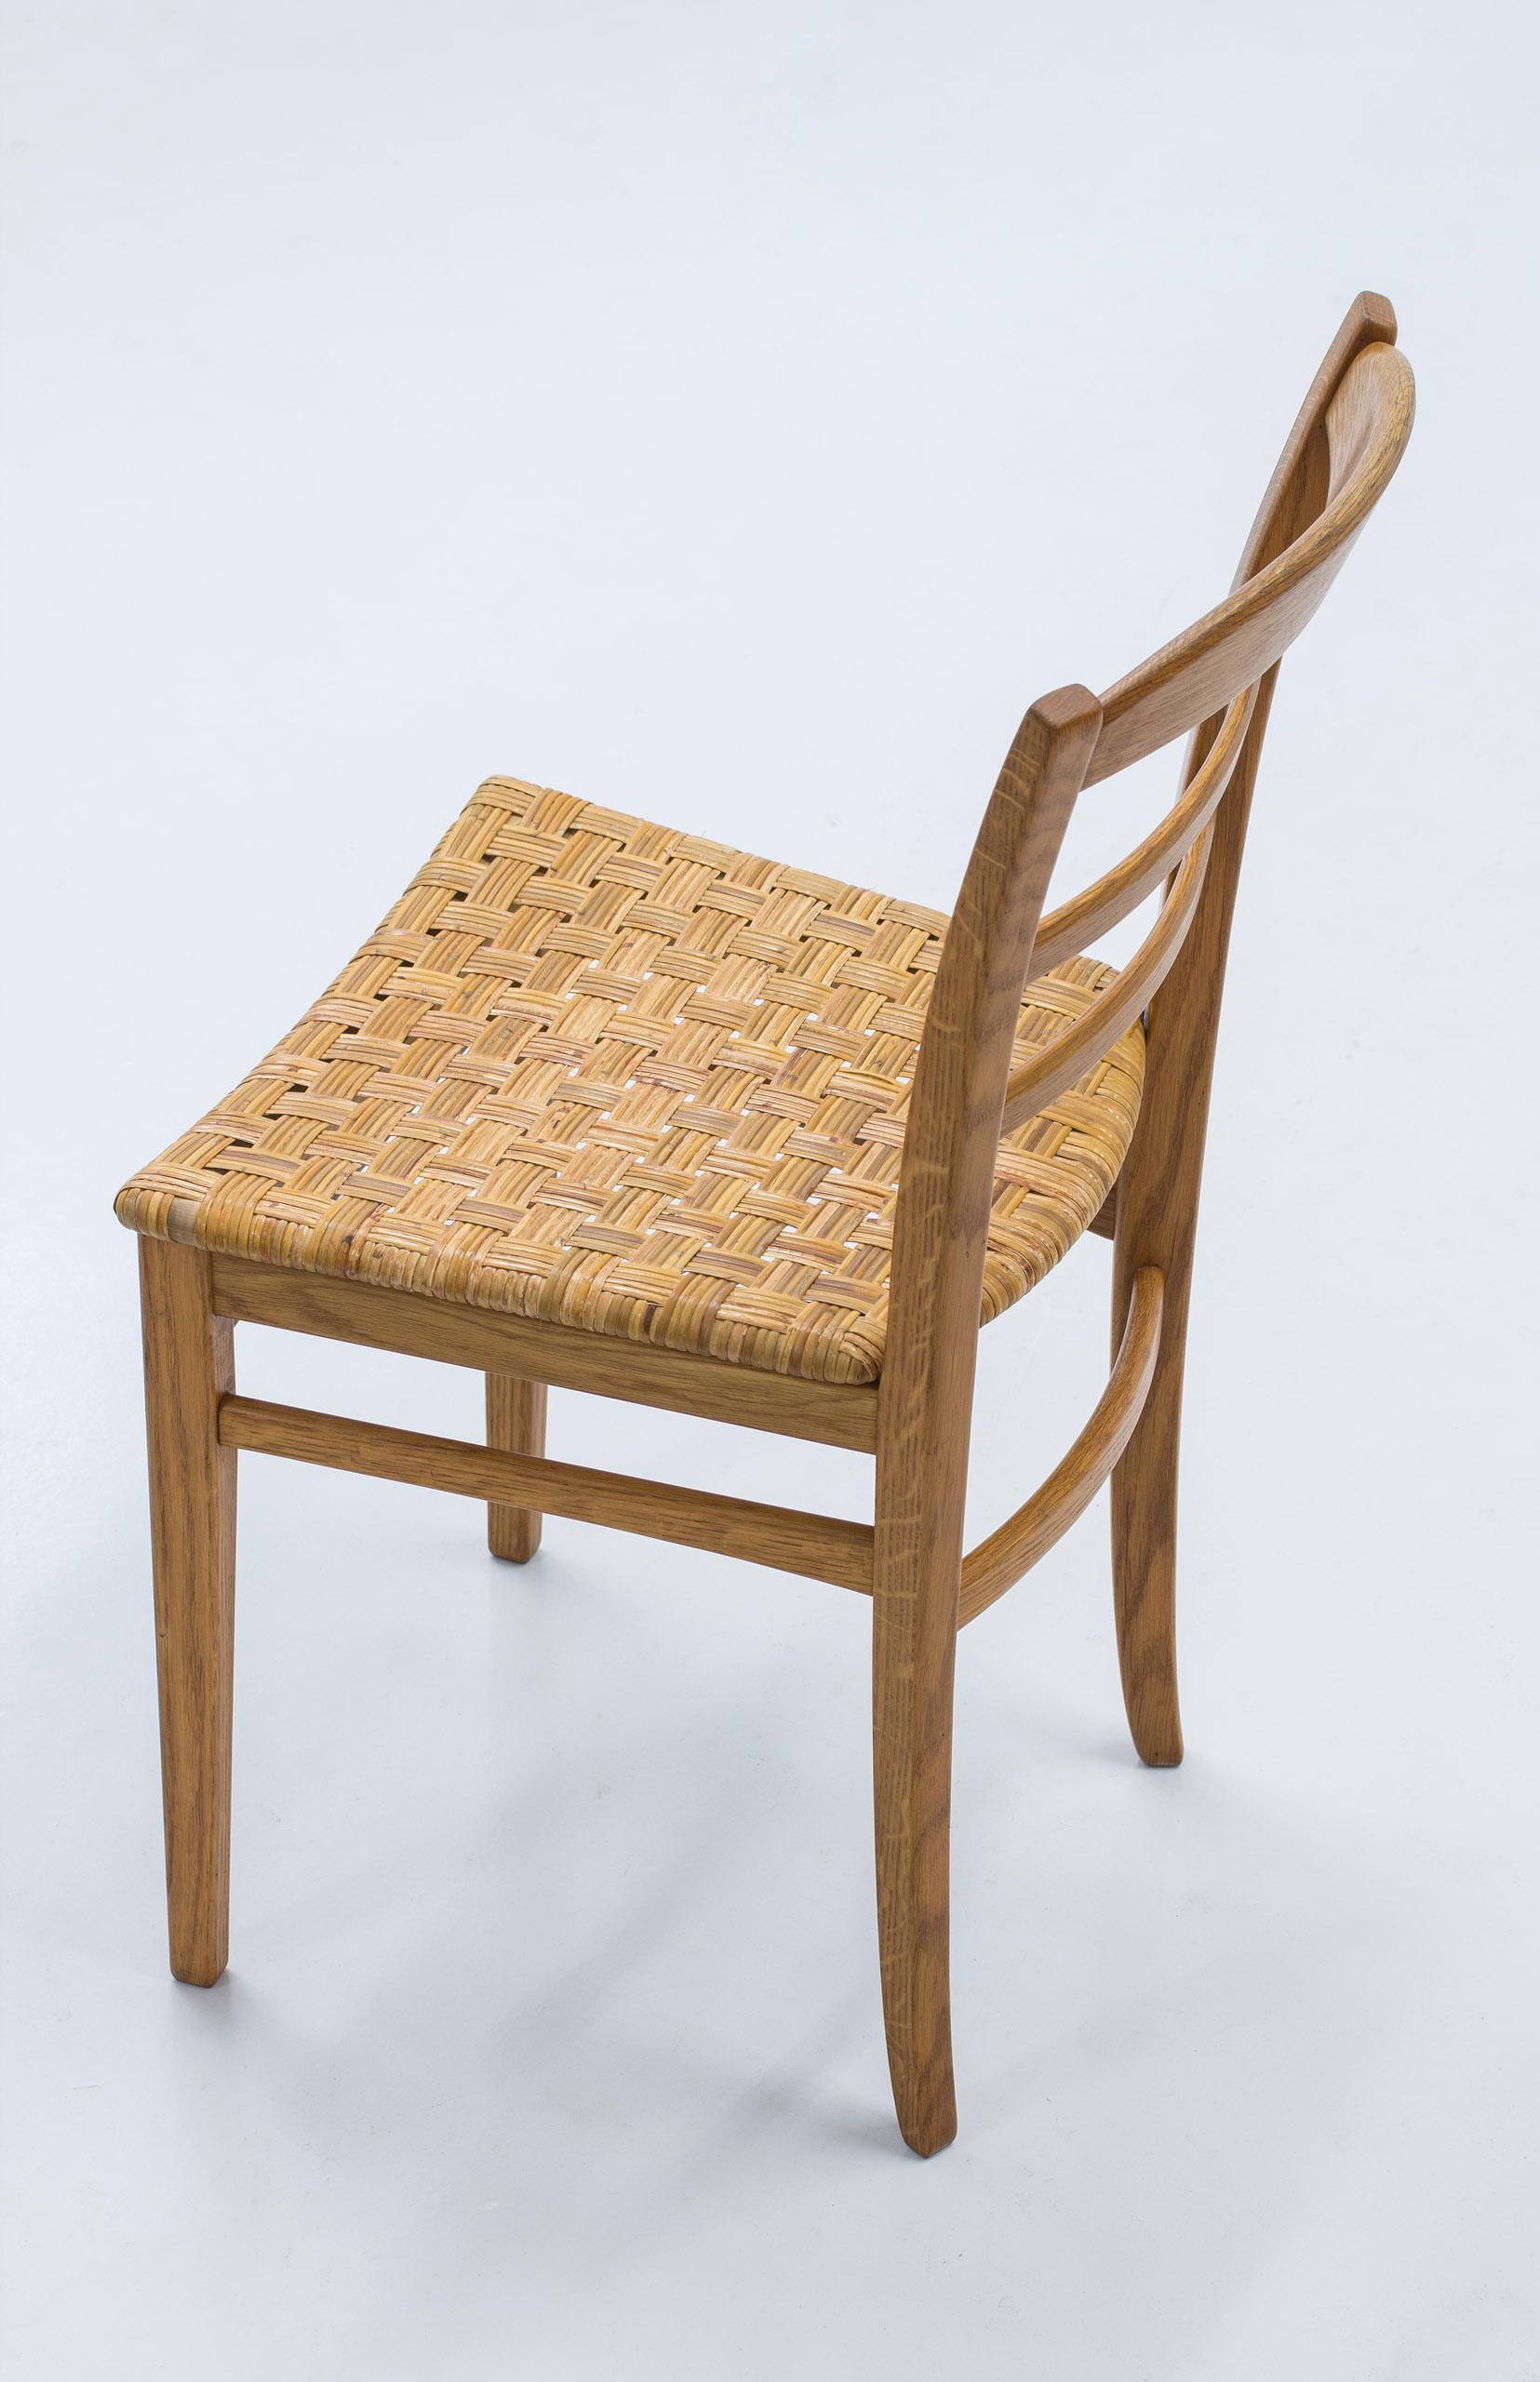 Oak and Cane Weave Dining Chairs by Carl Malmsten, Swedish Modern, 1950s For Sale 1